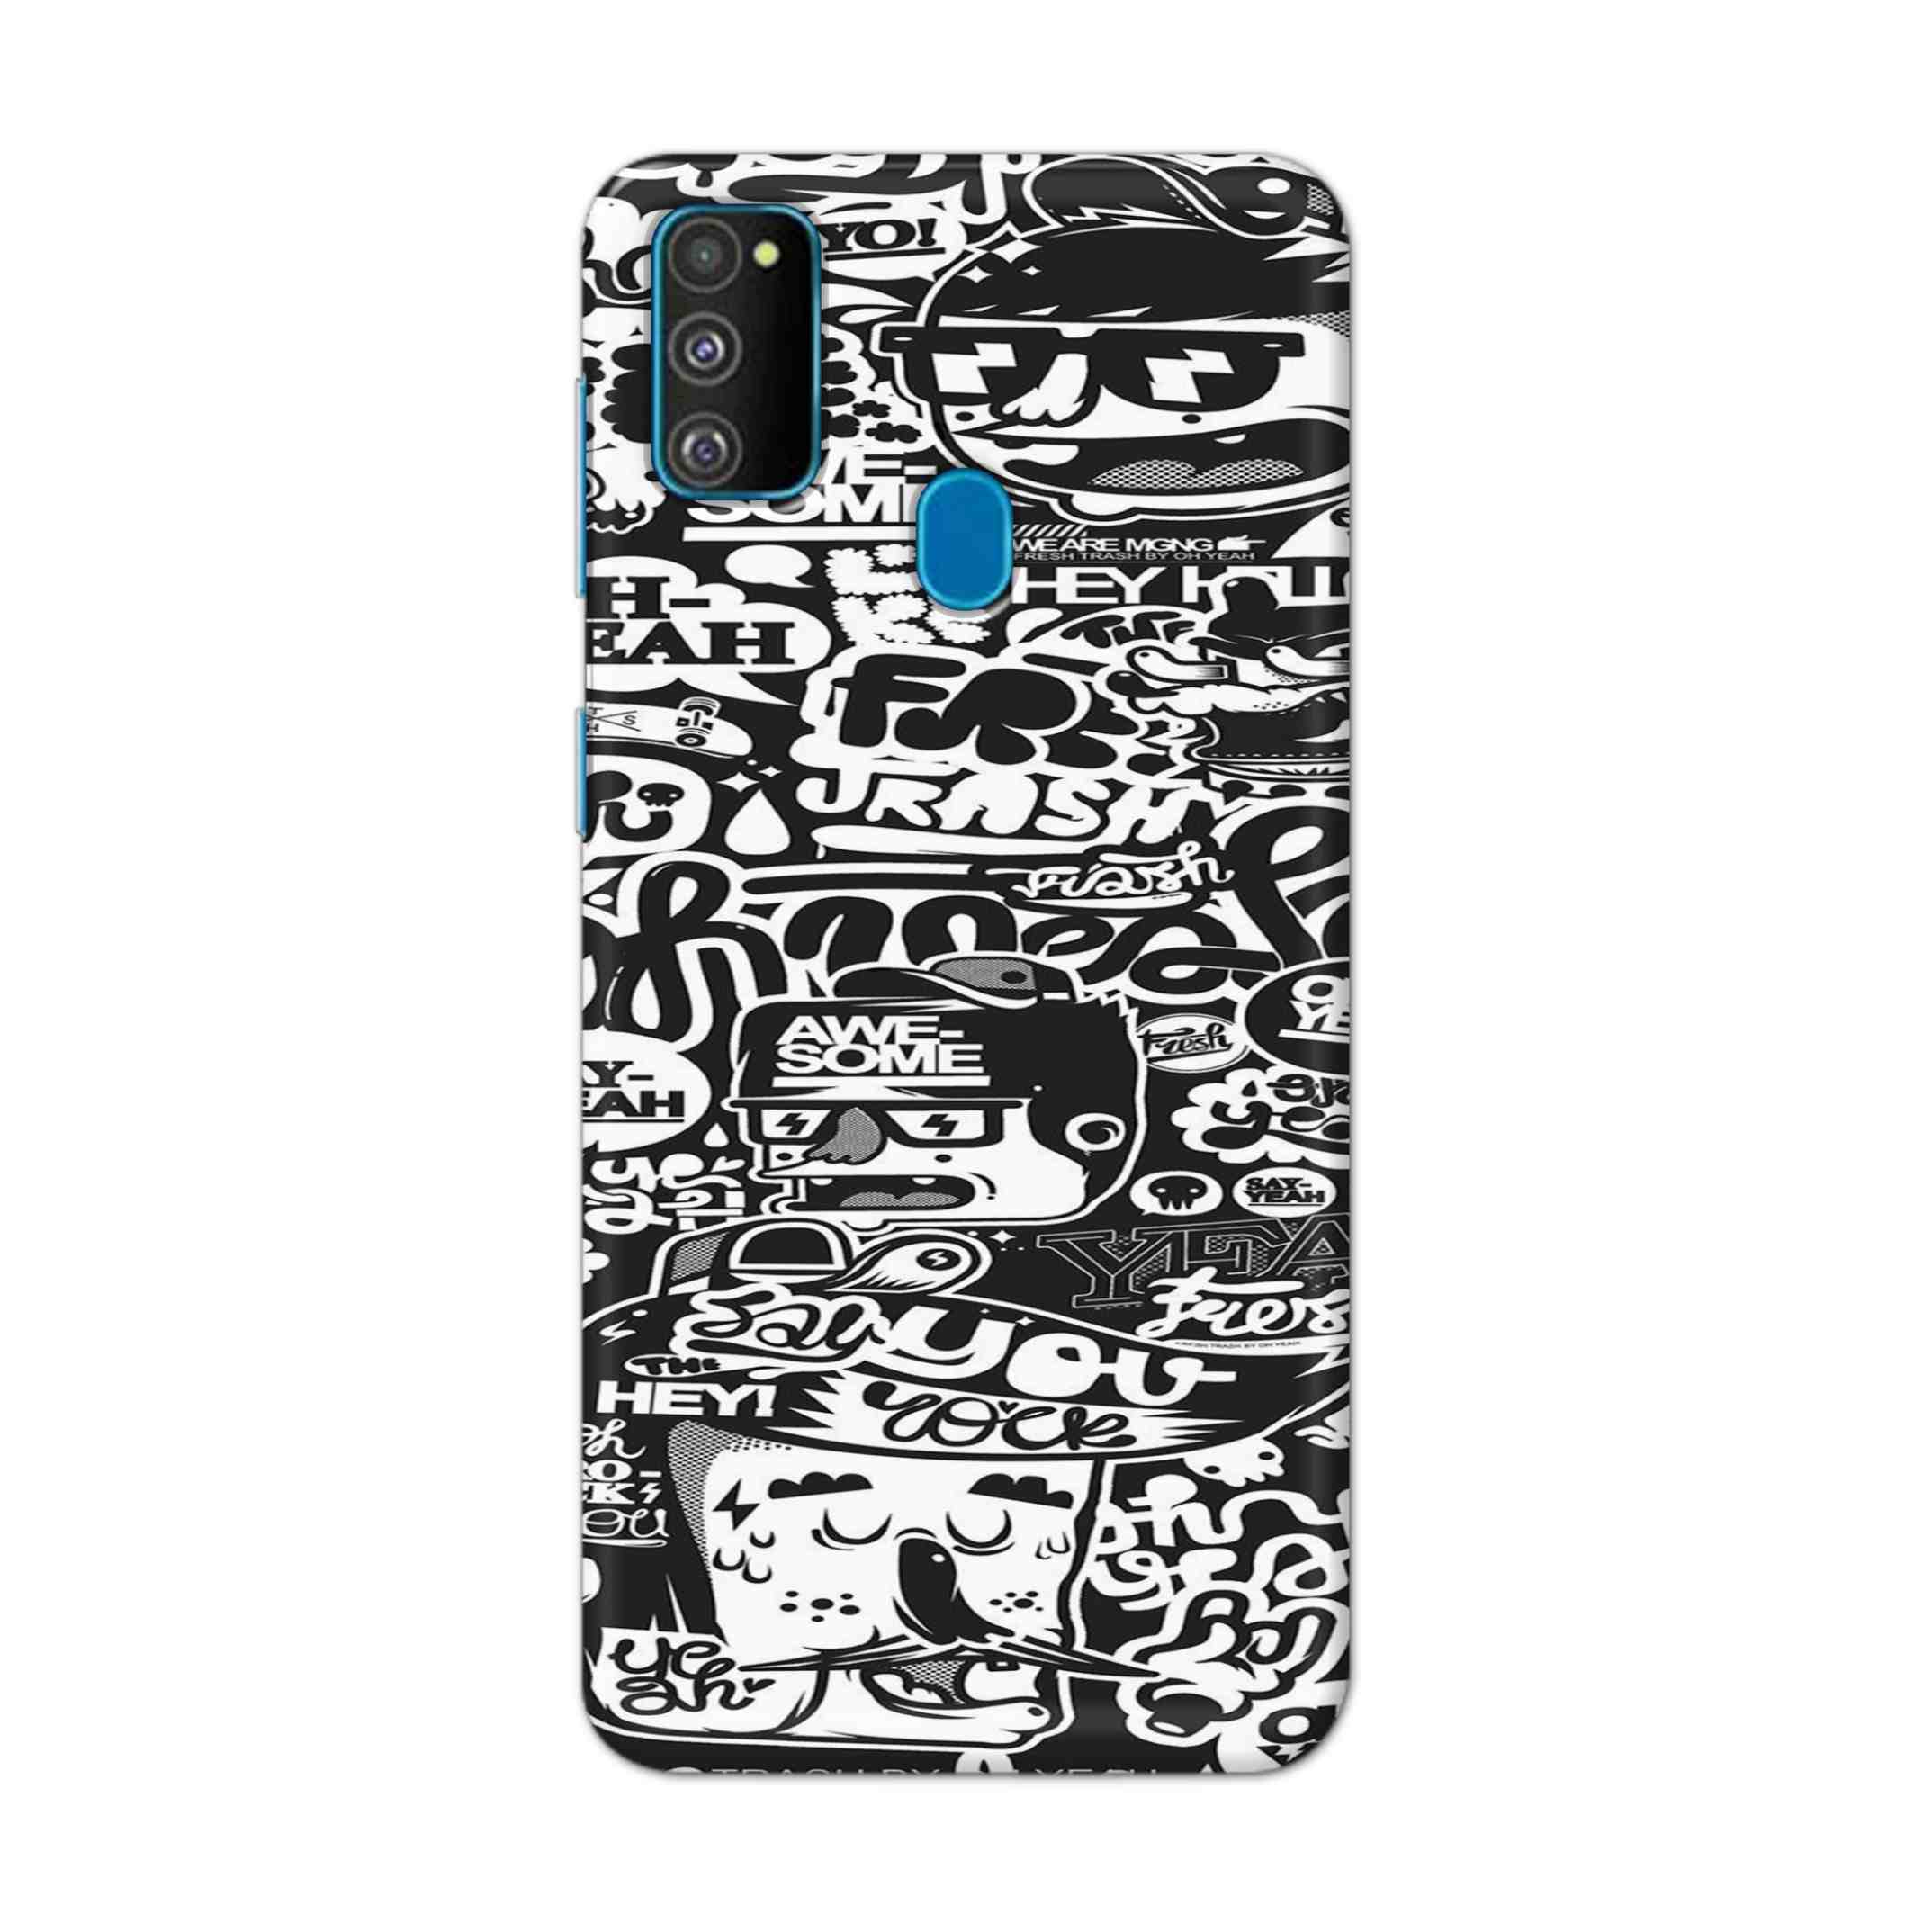 Buy Awesome Hard Back Mobile Phone Case Cover For Samsung Galaxy M30s Online